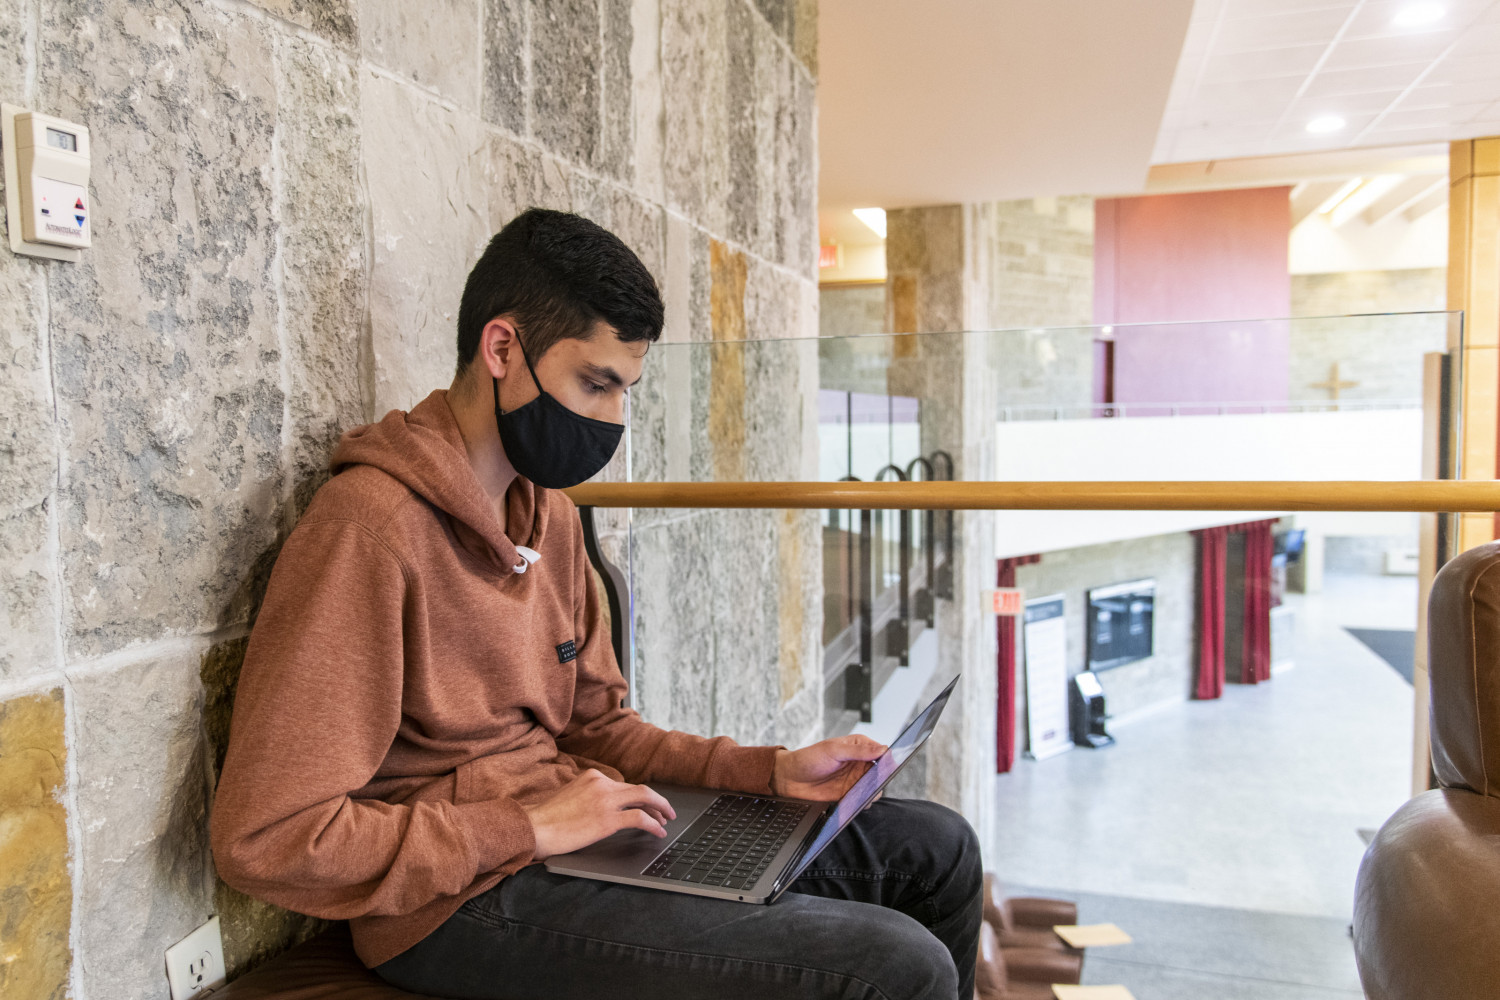 A student takes a study break between classes on the second floor of the Clausen Center.